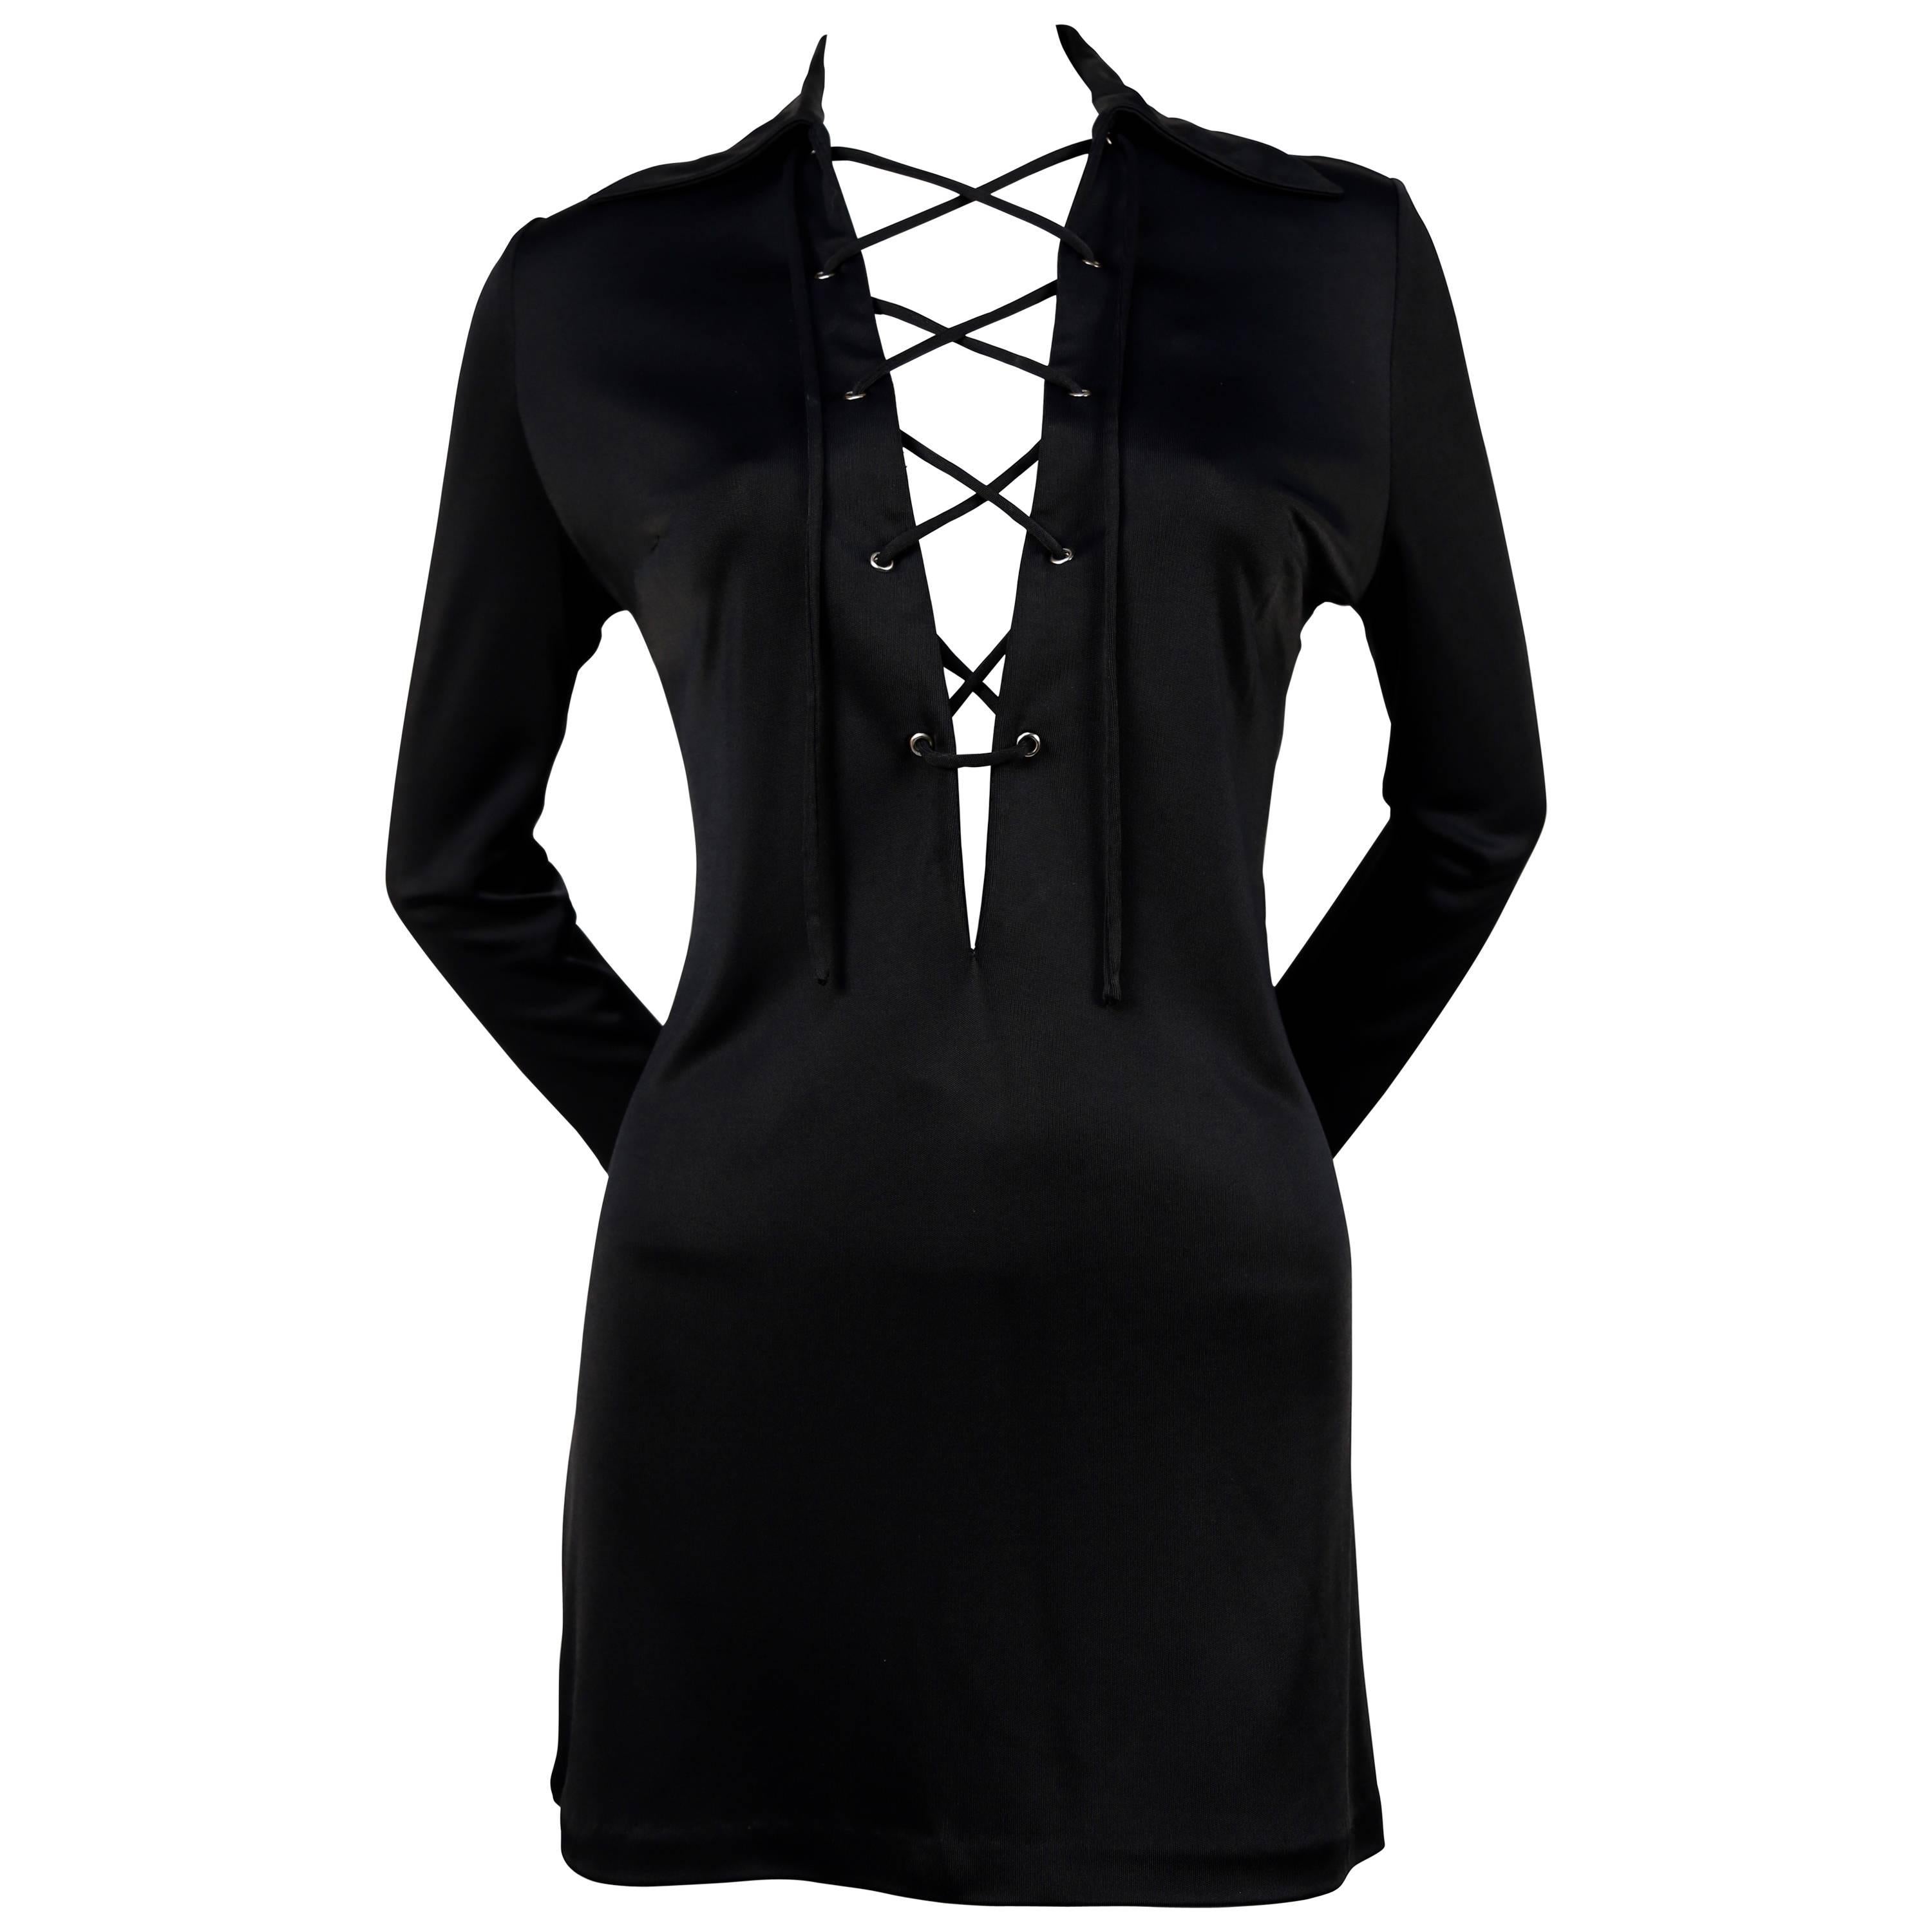 iconic 1996 TOM FORD for GUCCI black lace up mini dress